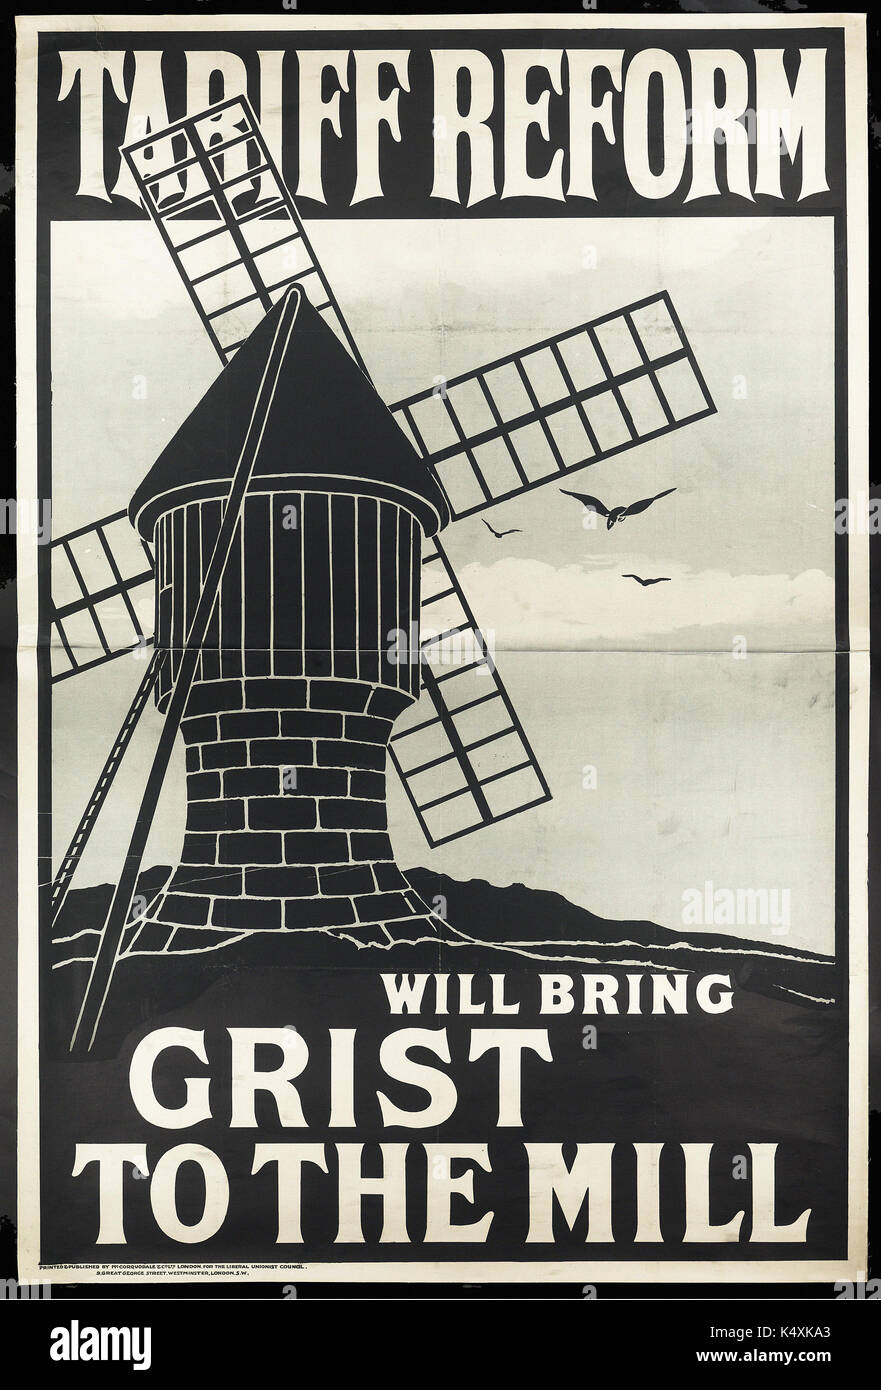 Tariff Reform Will Bring Grist To The Mill  - British Political Posters, c1905-c1910 Stock Photo